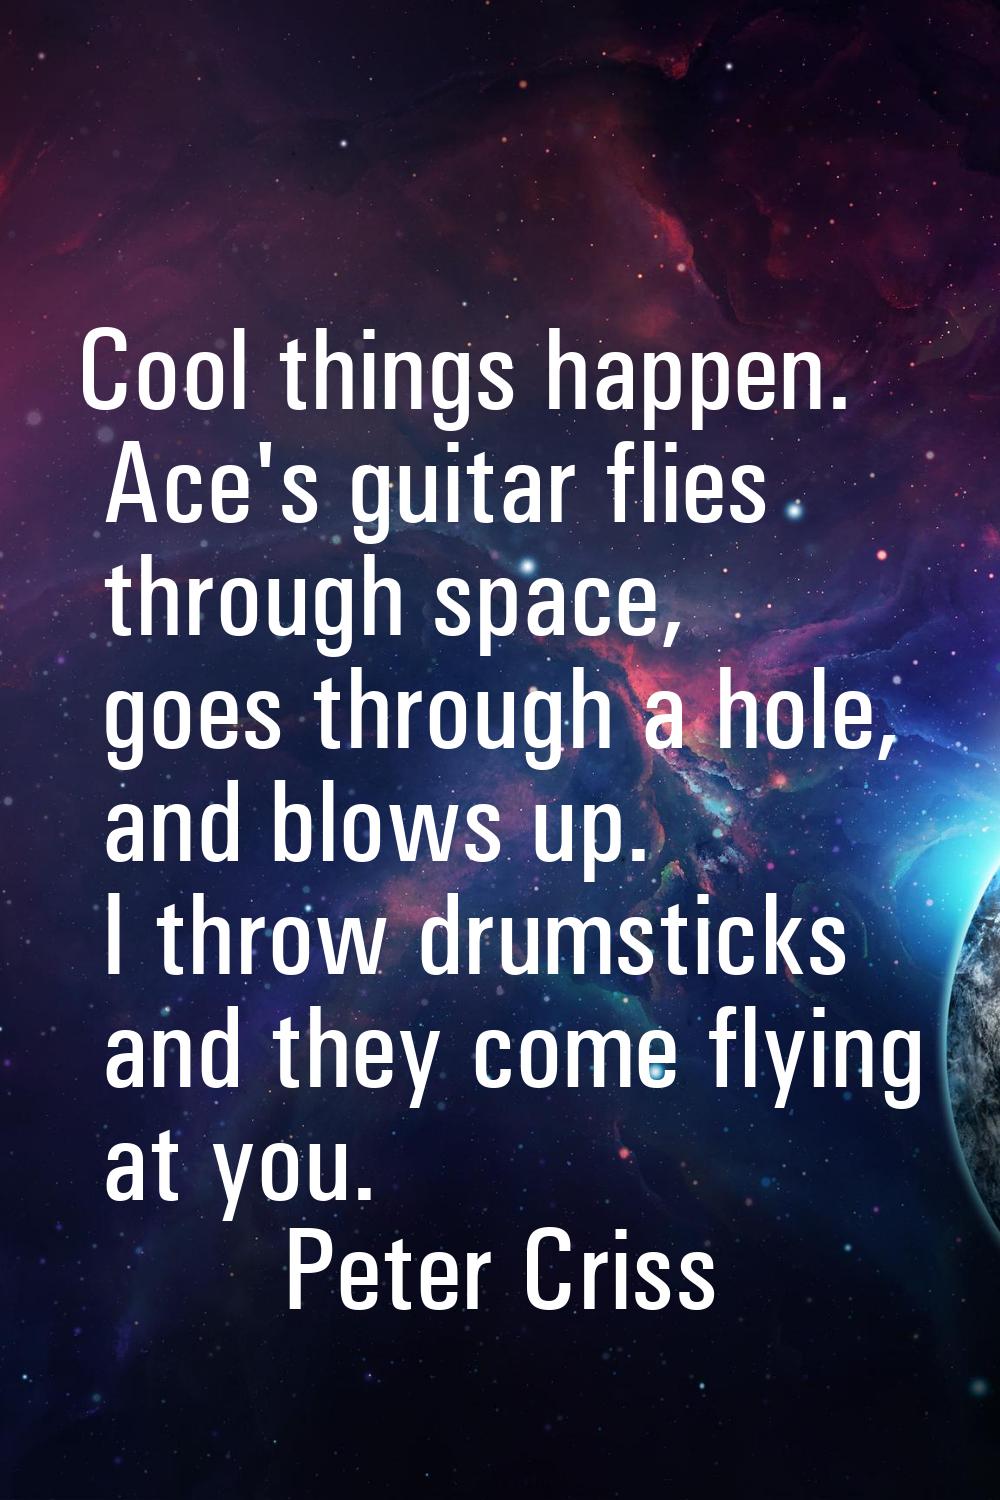 Cool things happen. Ace's guitar flies through space, goes through a hole, and blows up. I throw dr